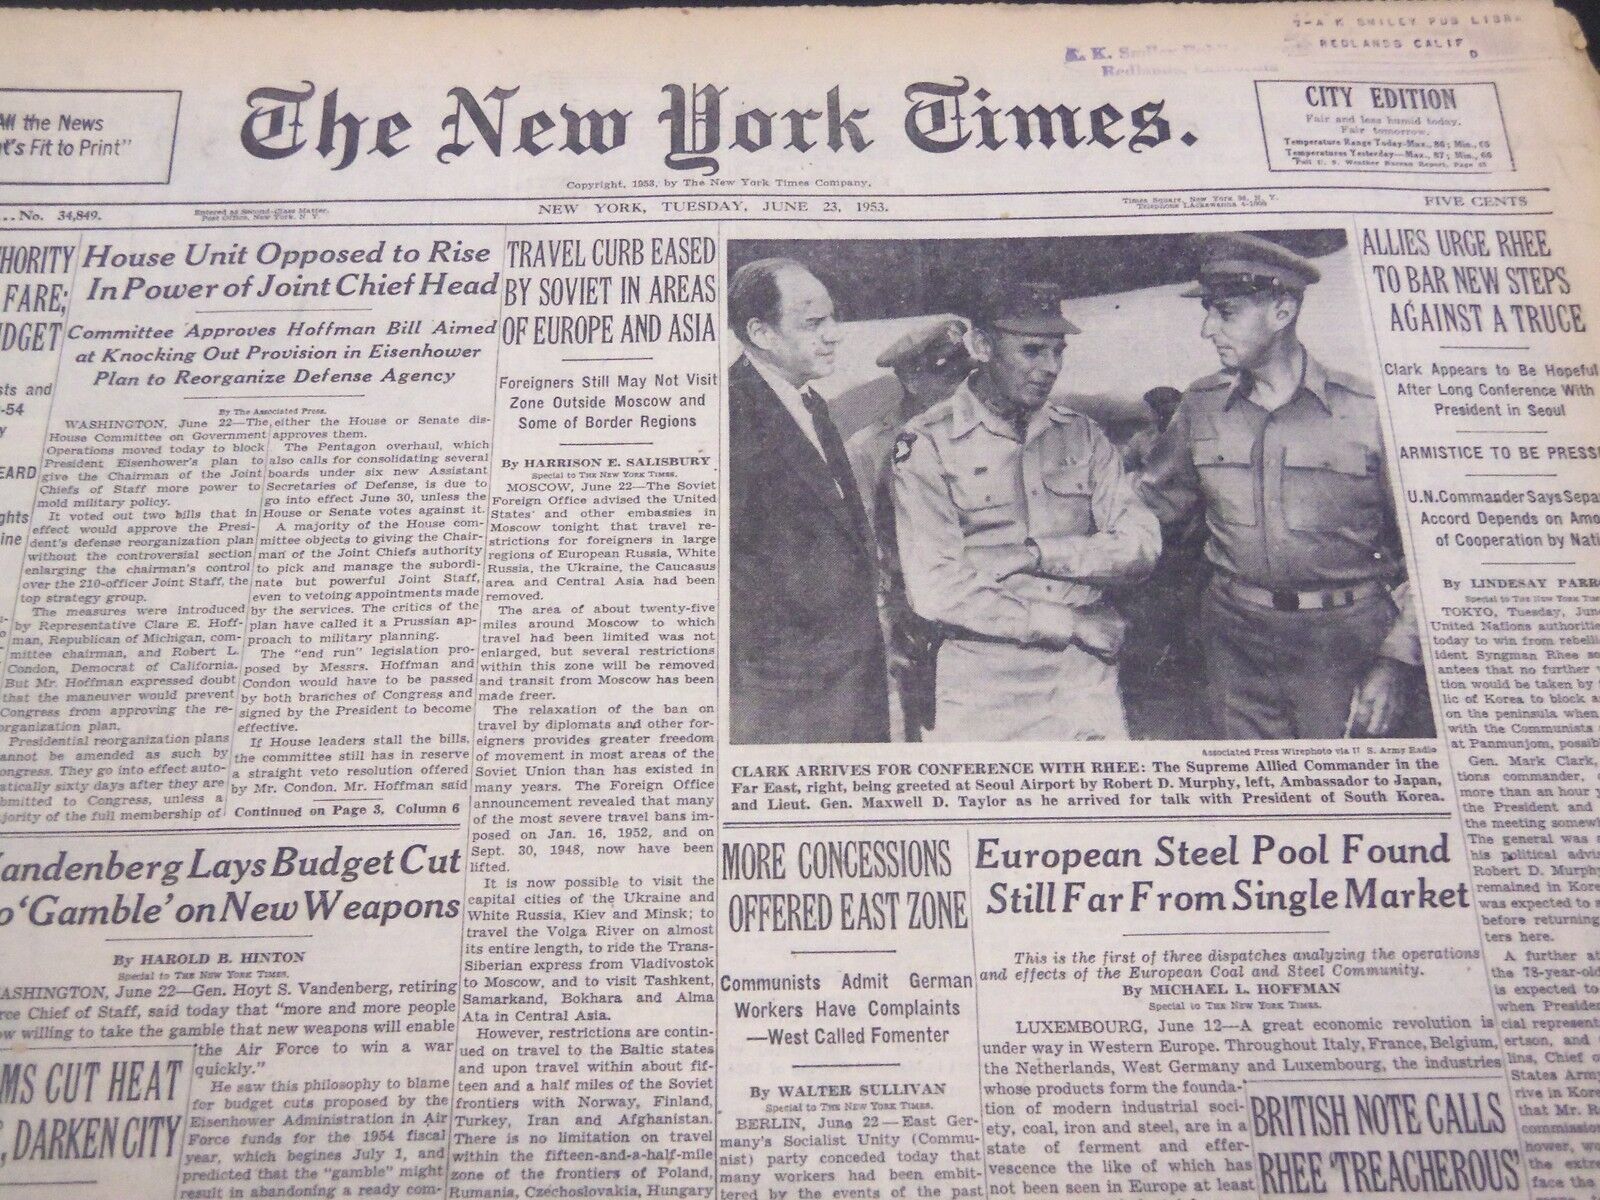 1953 JUNE 23 NEW YORK TIMES - CLARK ARRIVES FOR CONFERENCE WITH RHEE - NT 4450